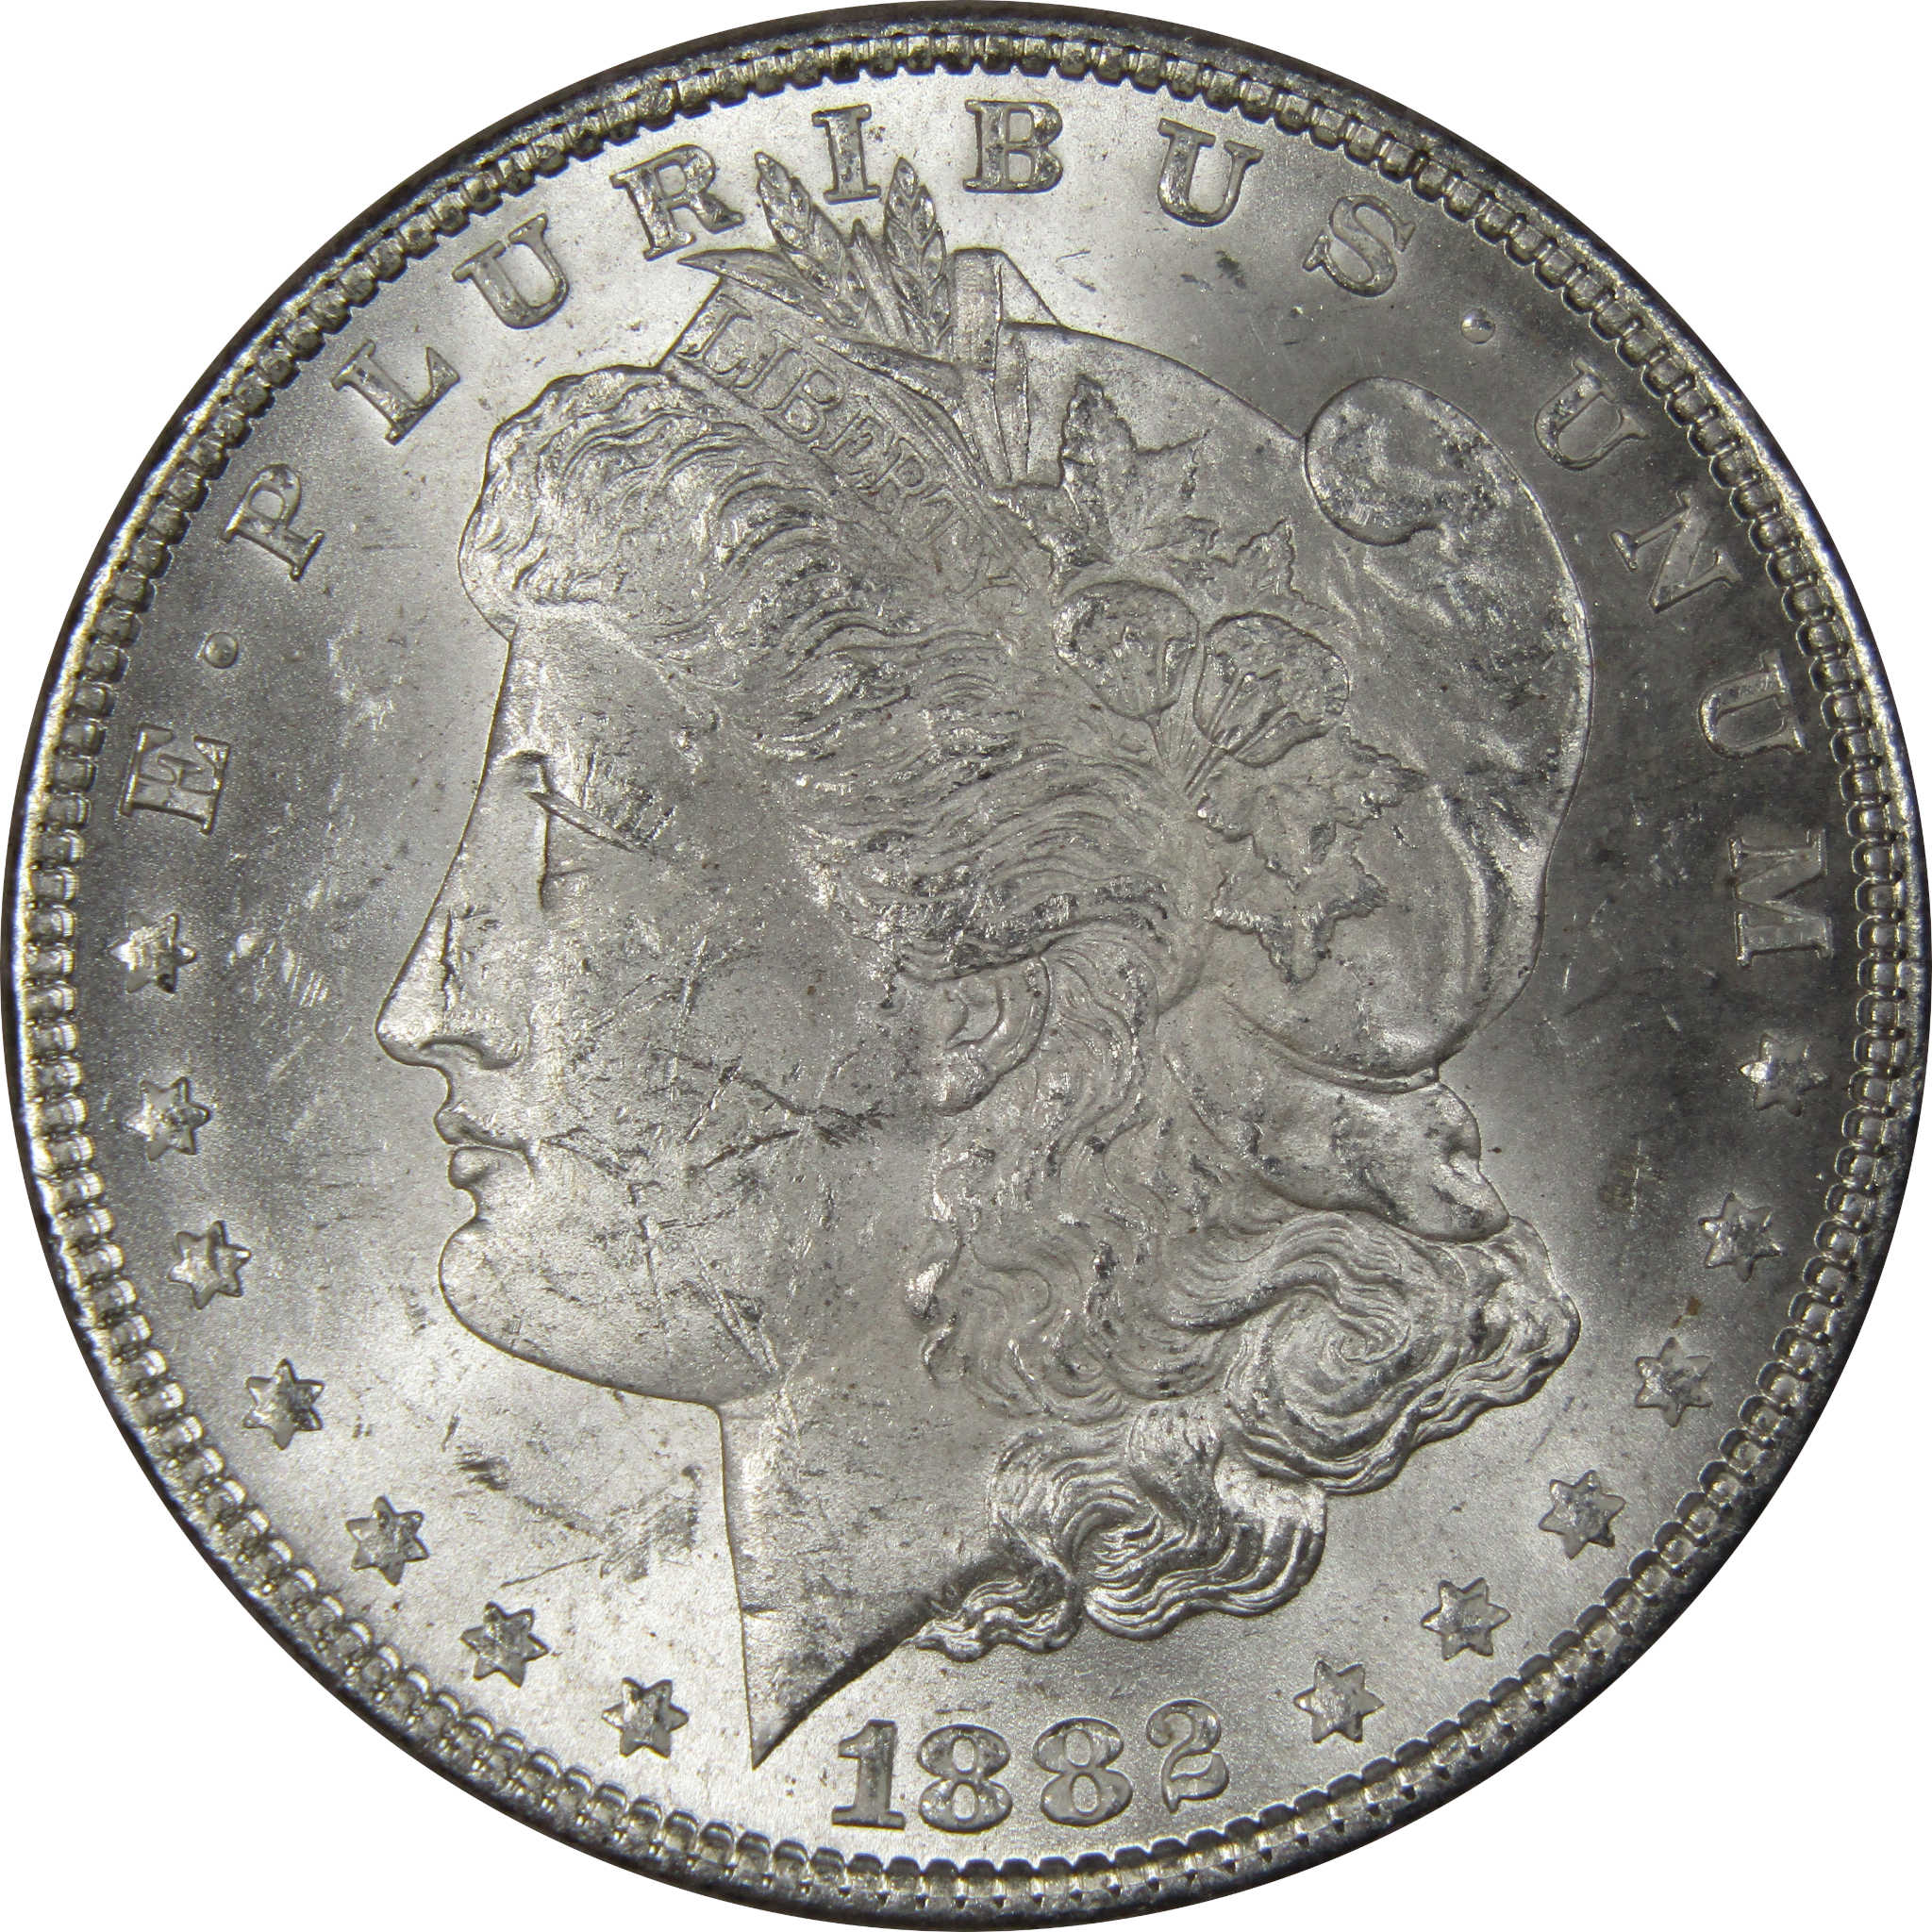 1882 Morgan Dollar BU Uncirculated Mint State 90% Silver SKU:IPC9678 - Morgan coin - Morgan silver dollar - Morgan silver dollar for sale - Profile Coins &amp; Collectibles